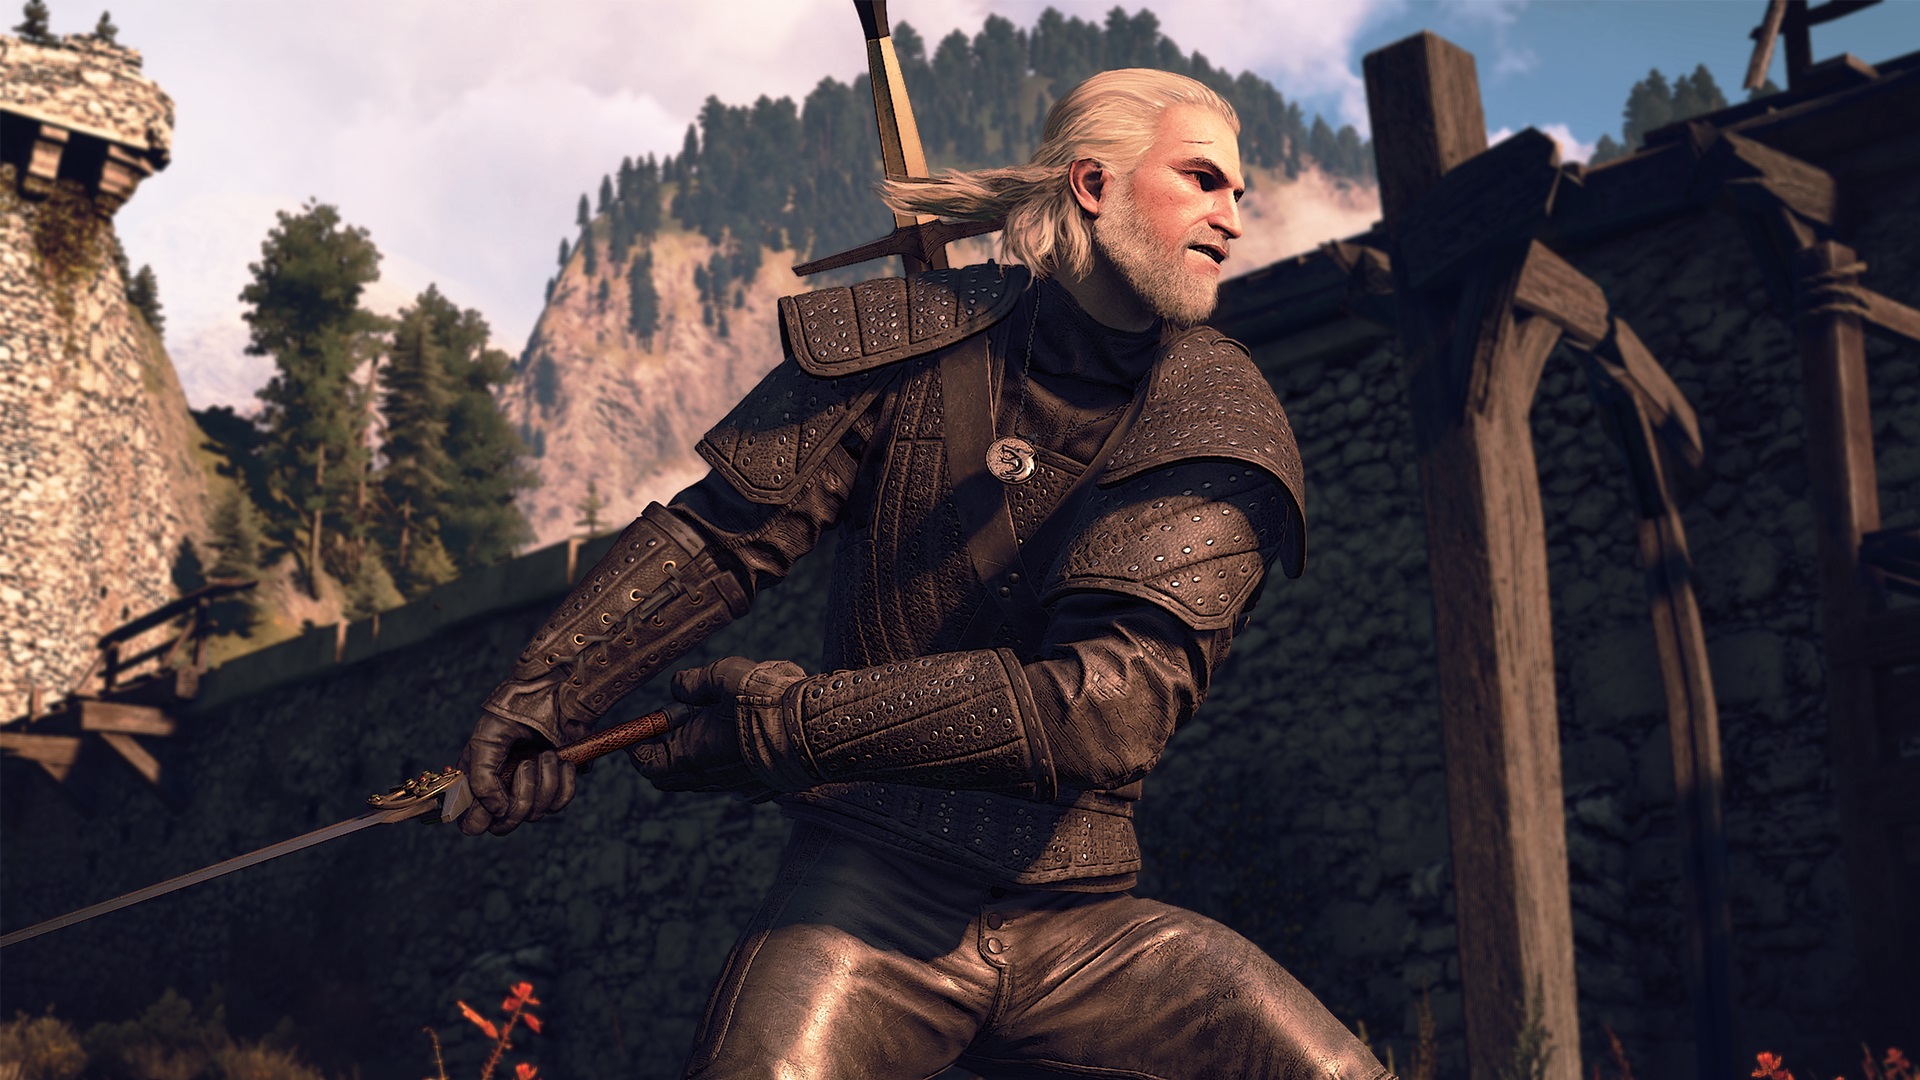 The Witcher 3 next-gen update patch notes - everything new in the